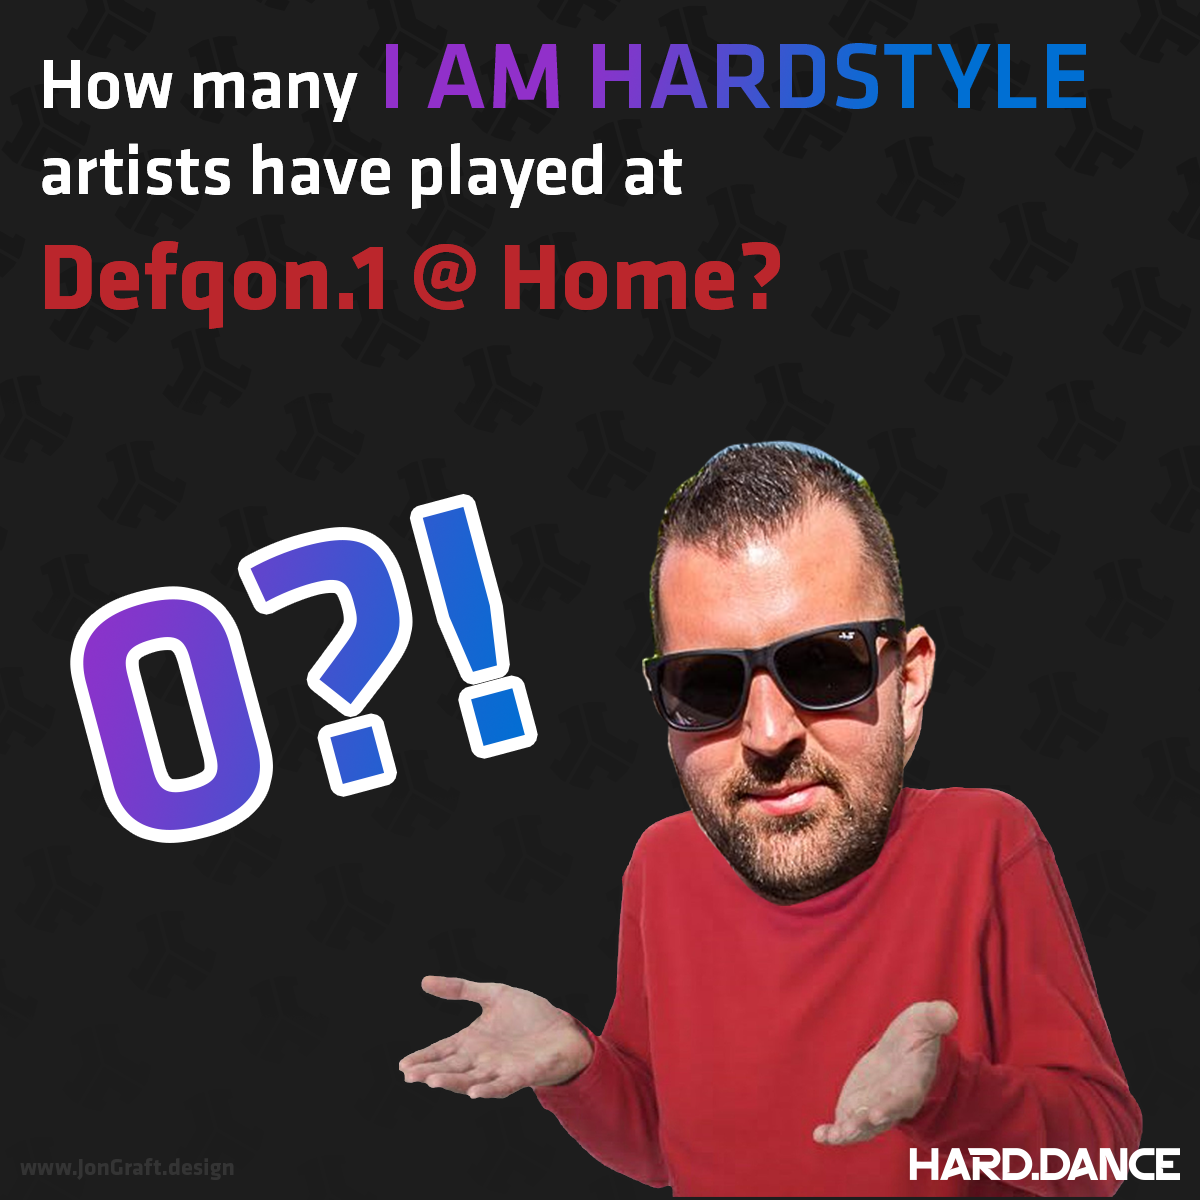 How many I AM HARDSTYLE artists have played at Defqon.1 @ Home infographic.